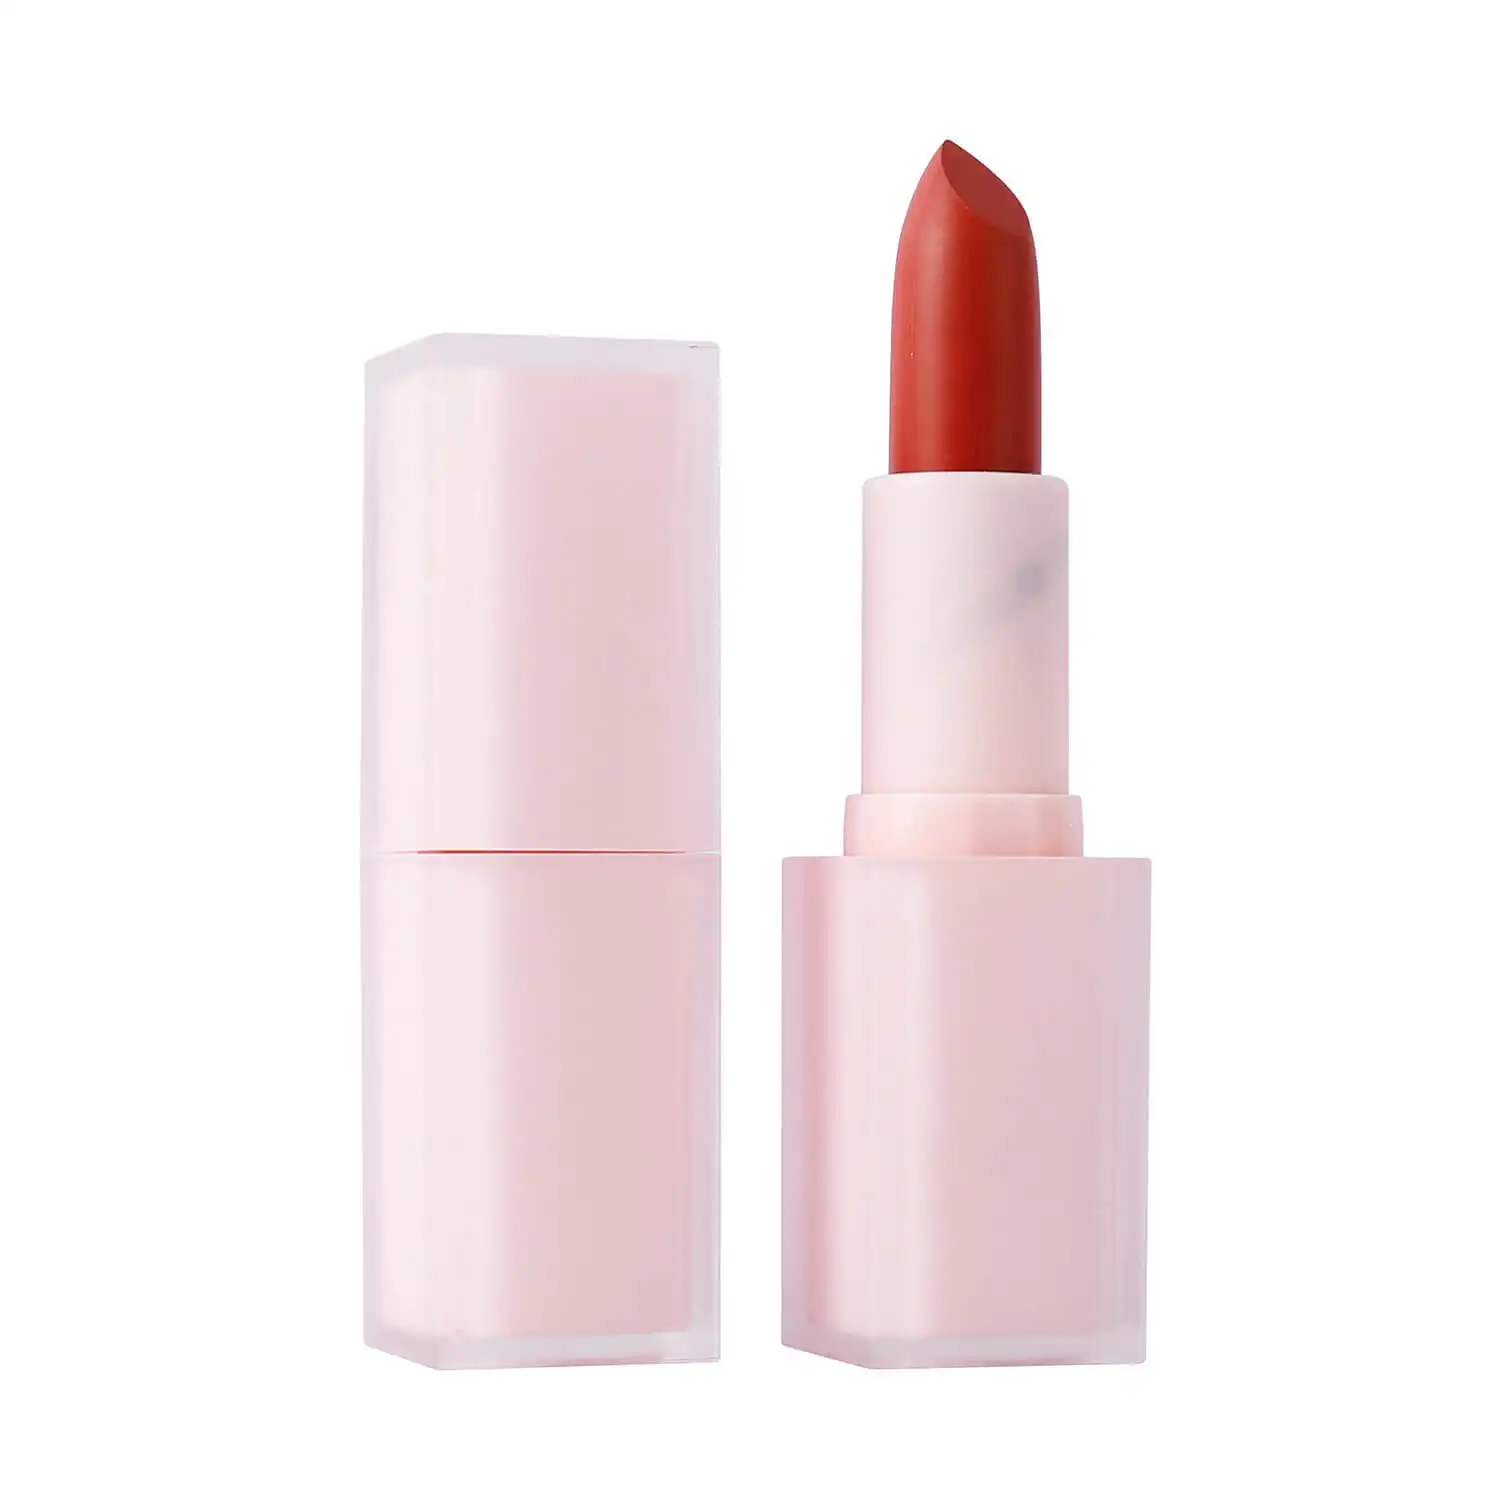 Private Label Glow Lipstick 14 Color Natural Beauty Plain Daily Makeup Moisturizing Vegan Water Smooth Wholesale